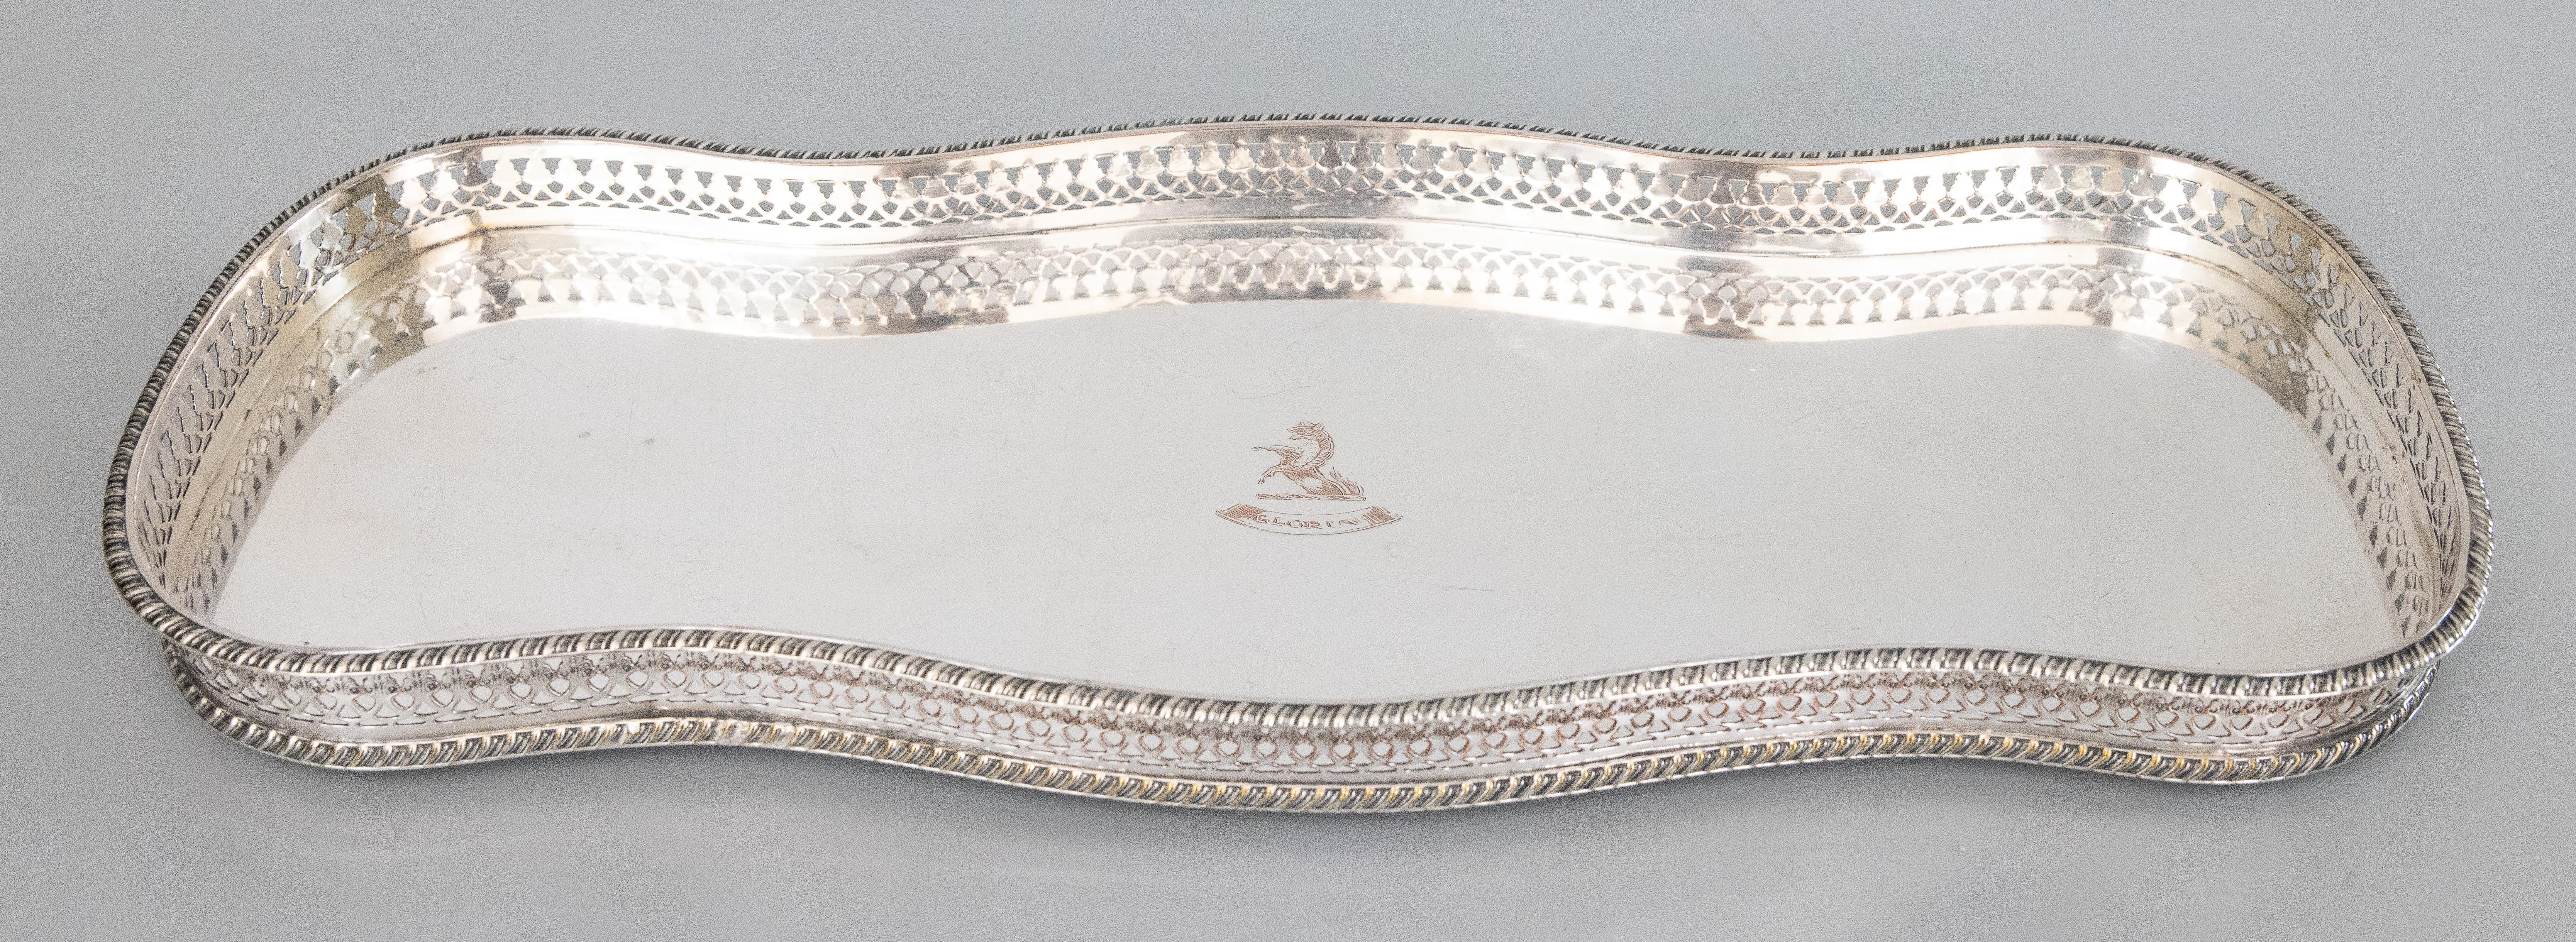 A fine antique English silverplate footed gallery serving or barware tray. Hallmarks on reverse. This gorgeous tray is solid and heavy with a lovely serpentine design, pierced gallery, and charming bun feet, perfect for serving or